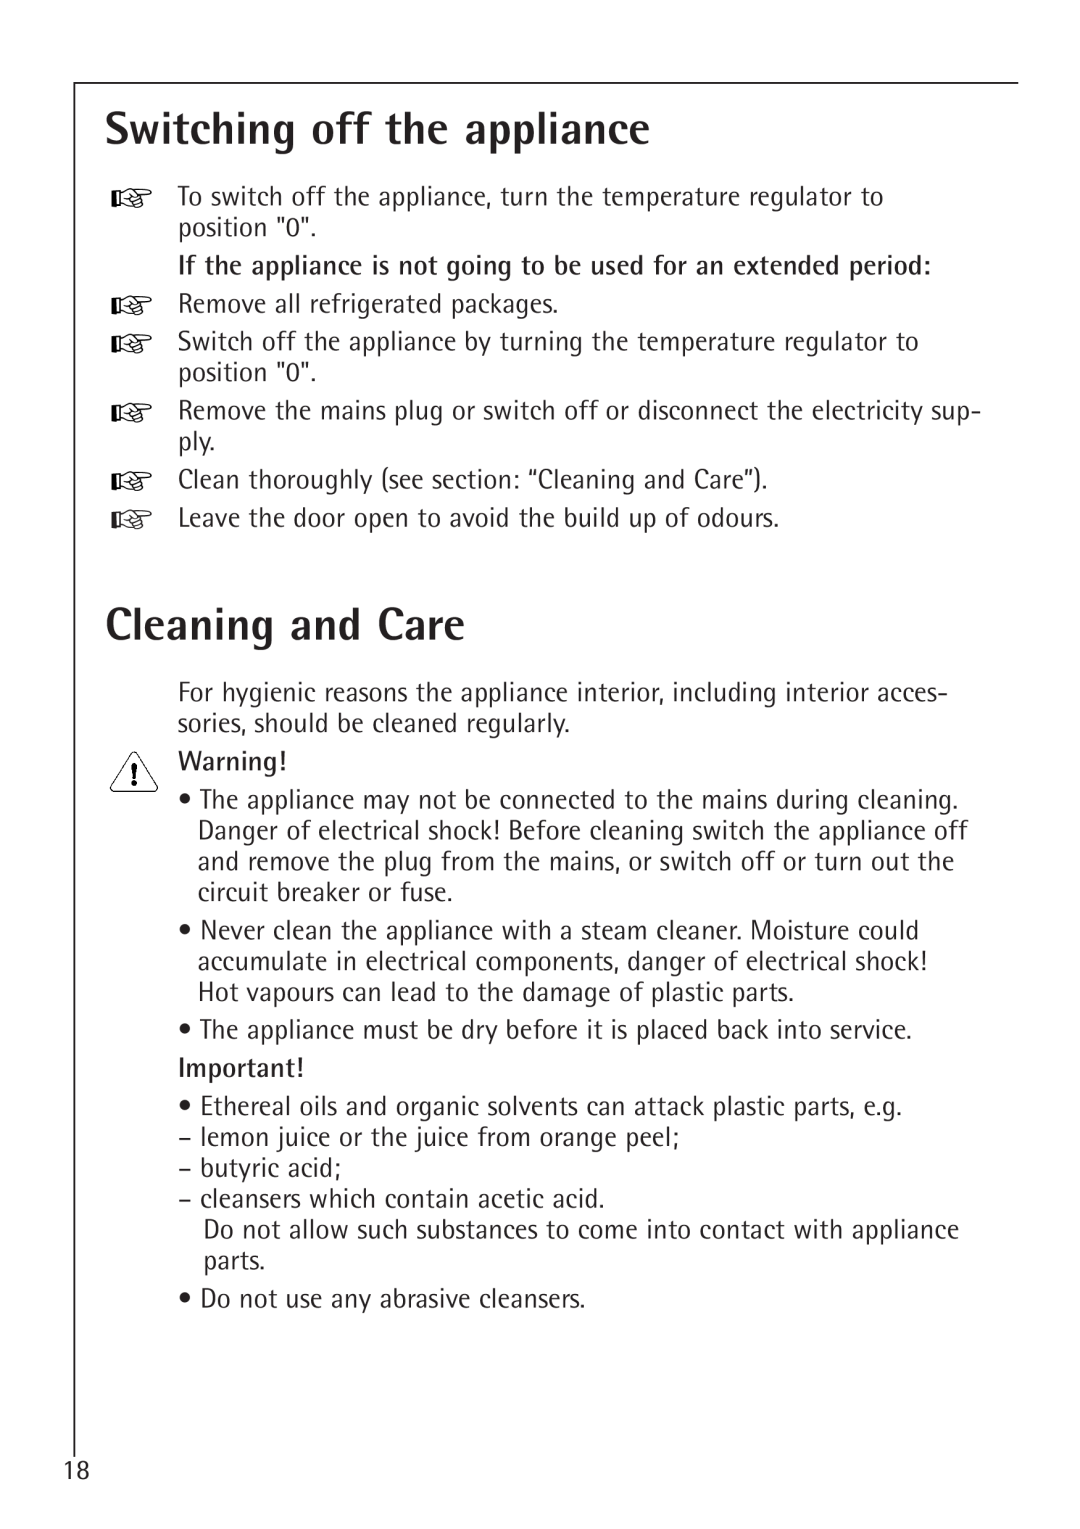 AEG 1450-7 TK manual Switching off the appliance, Cleaning and Care 